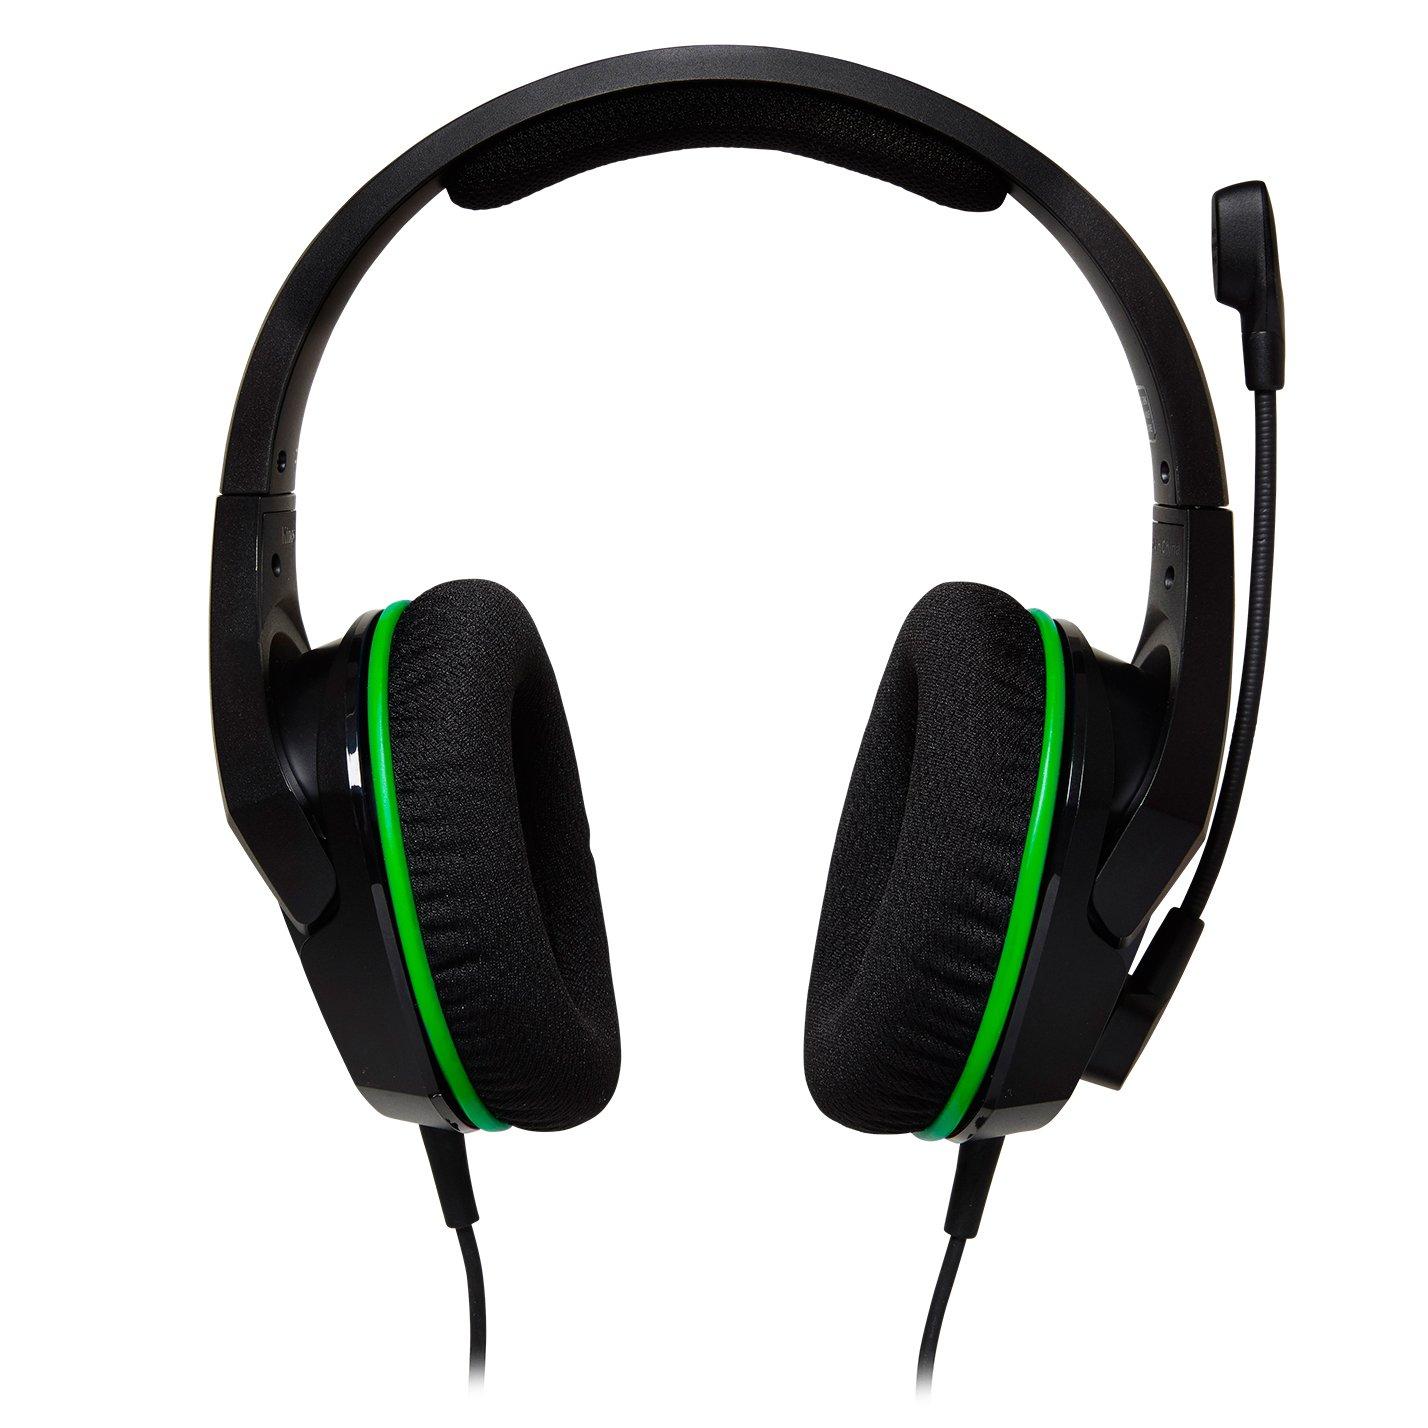 hyperx headset for xbox one